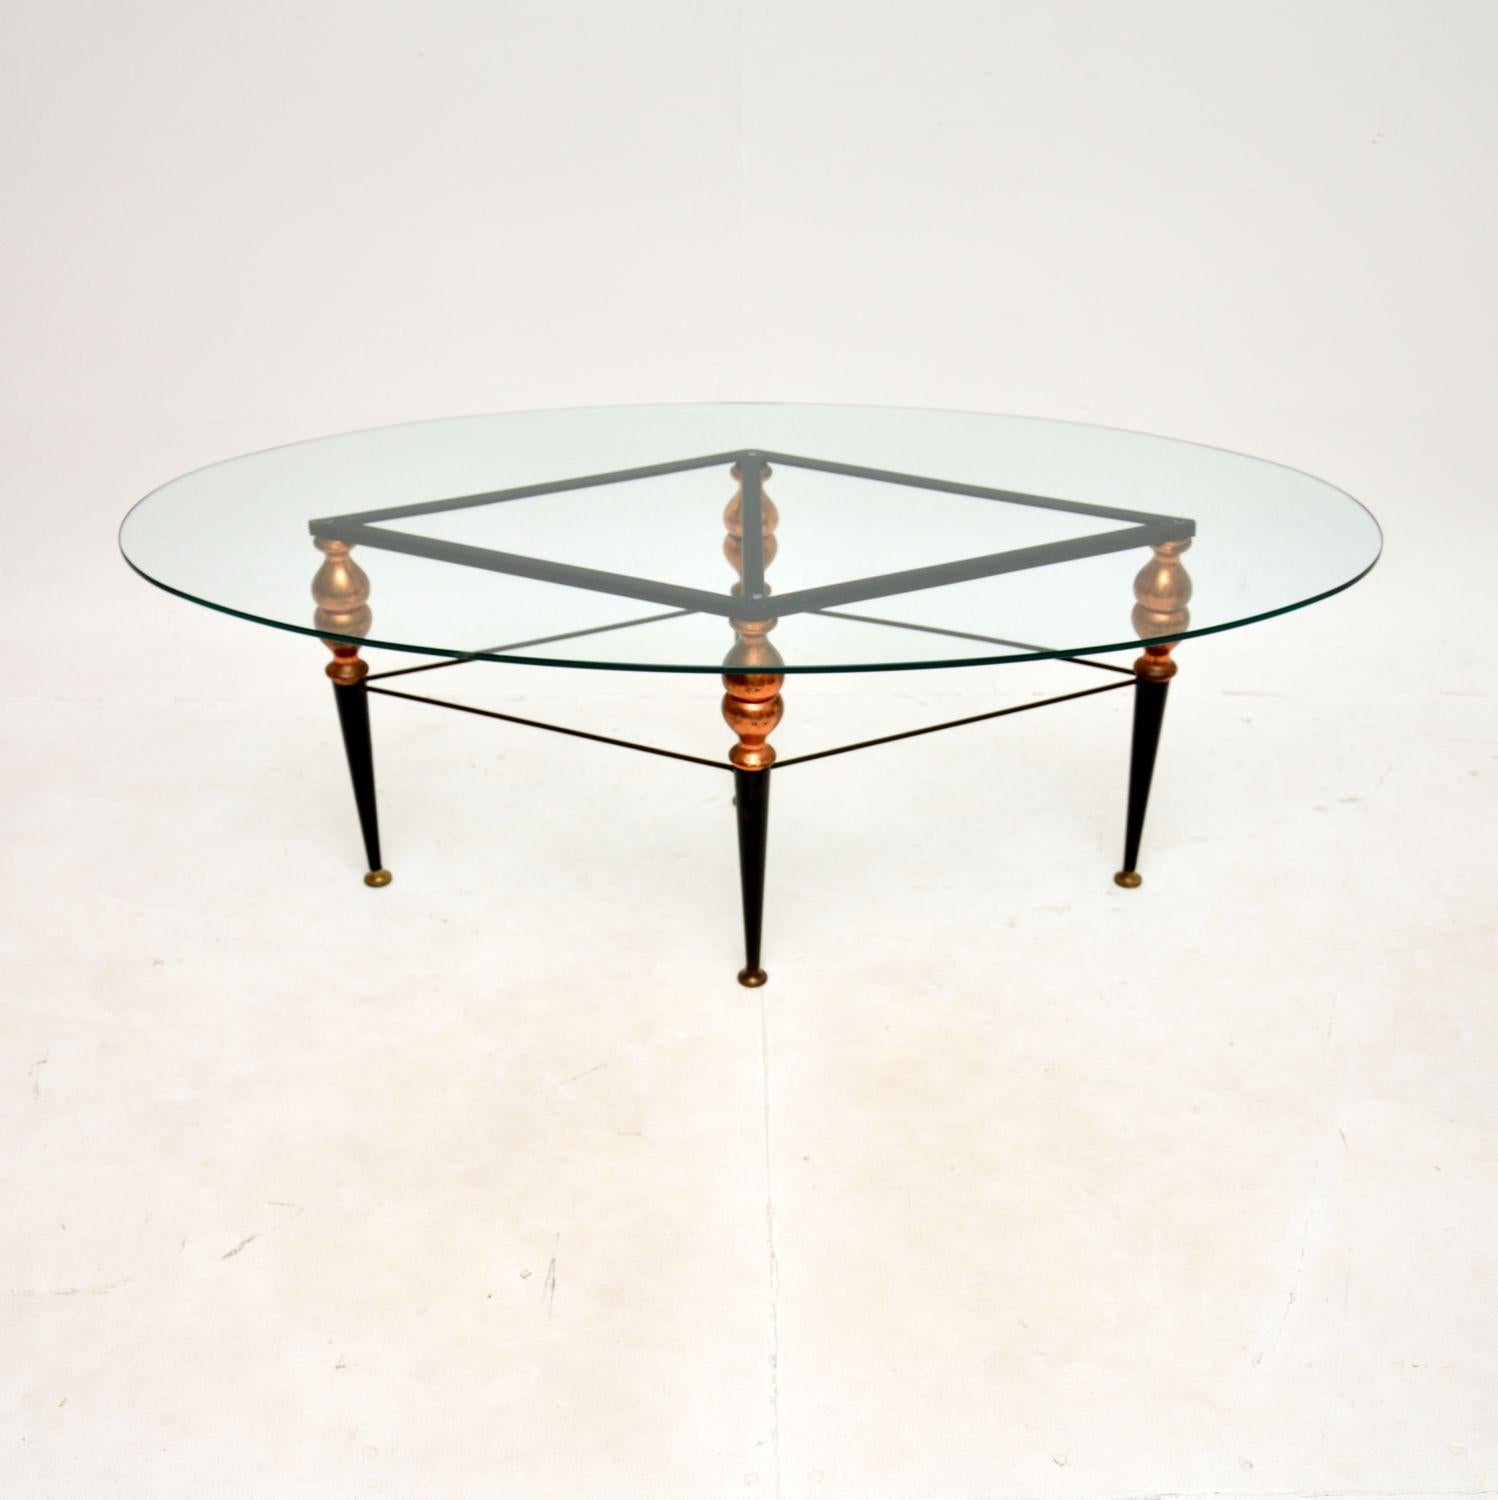 A stylish and very well made vintage Italian steel and copper coffee table. This was recently imported from Italy, it dates from around the 1960’s.

The quality is superb, the large clear toughened glass oval top sits on a beautifully designed base.